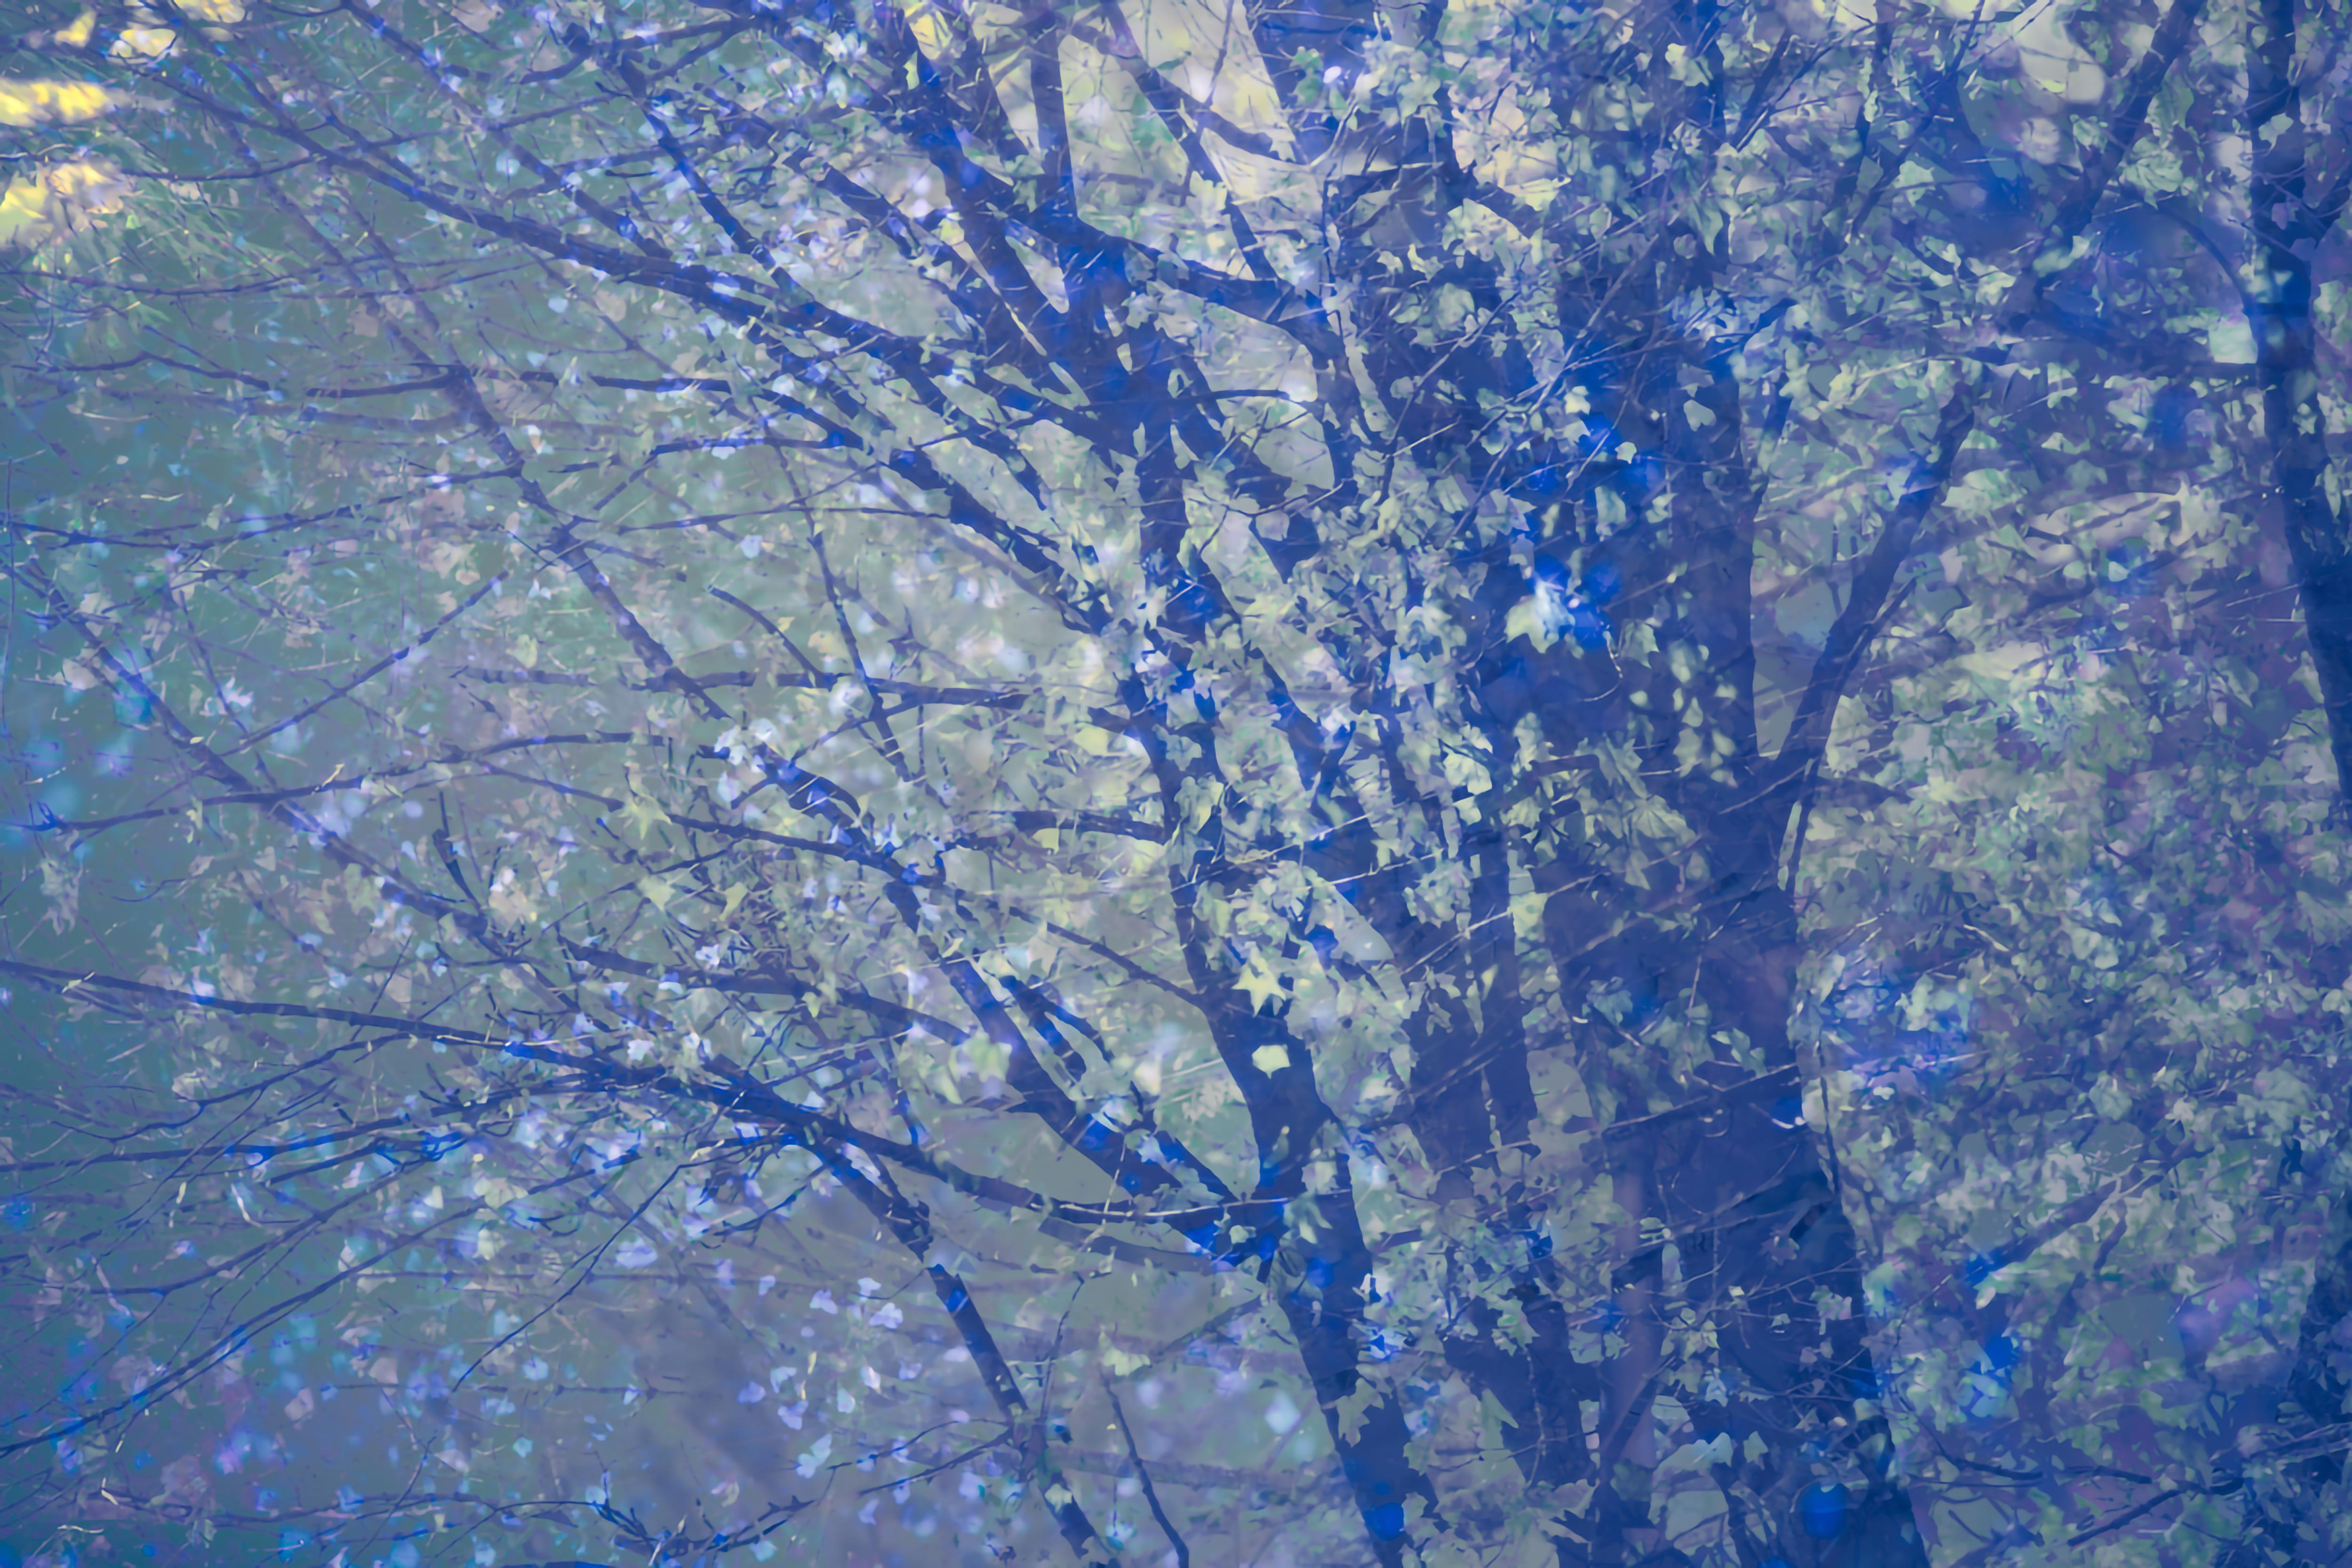 Tori Gagne Abstract Photograph - "Blue" Abstract Nature Photograph, 32" x 48"